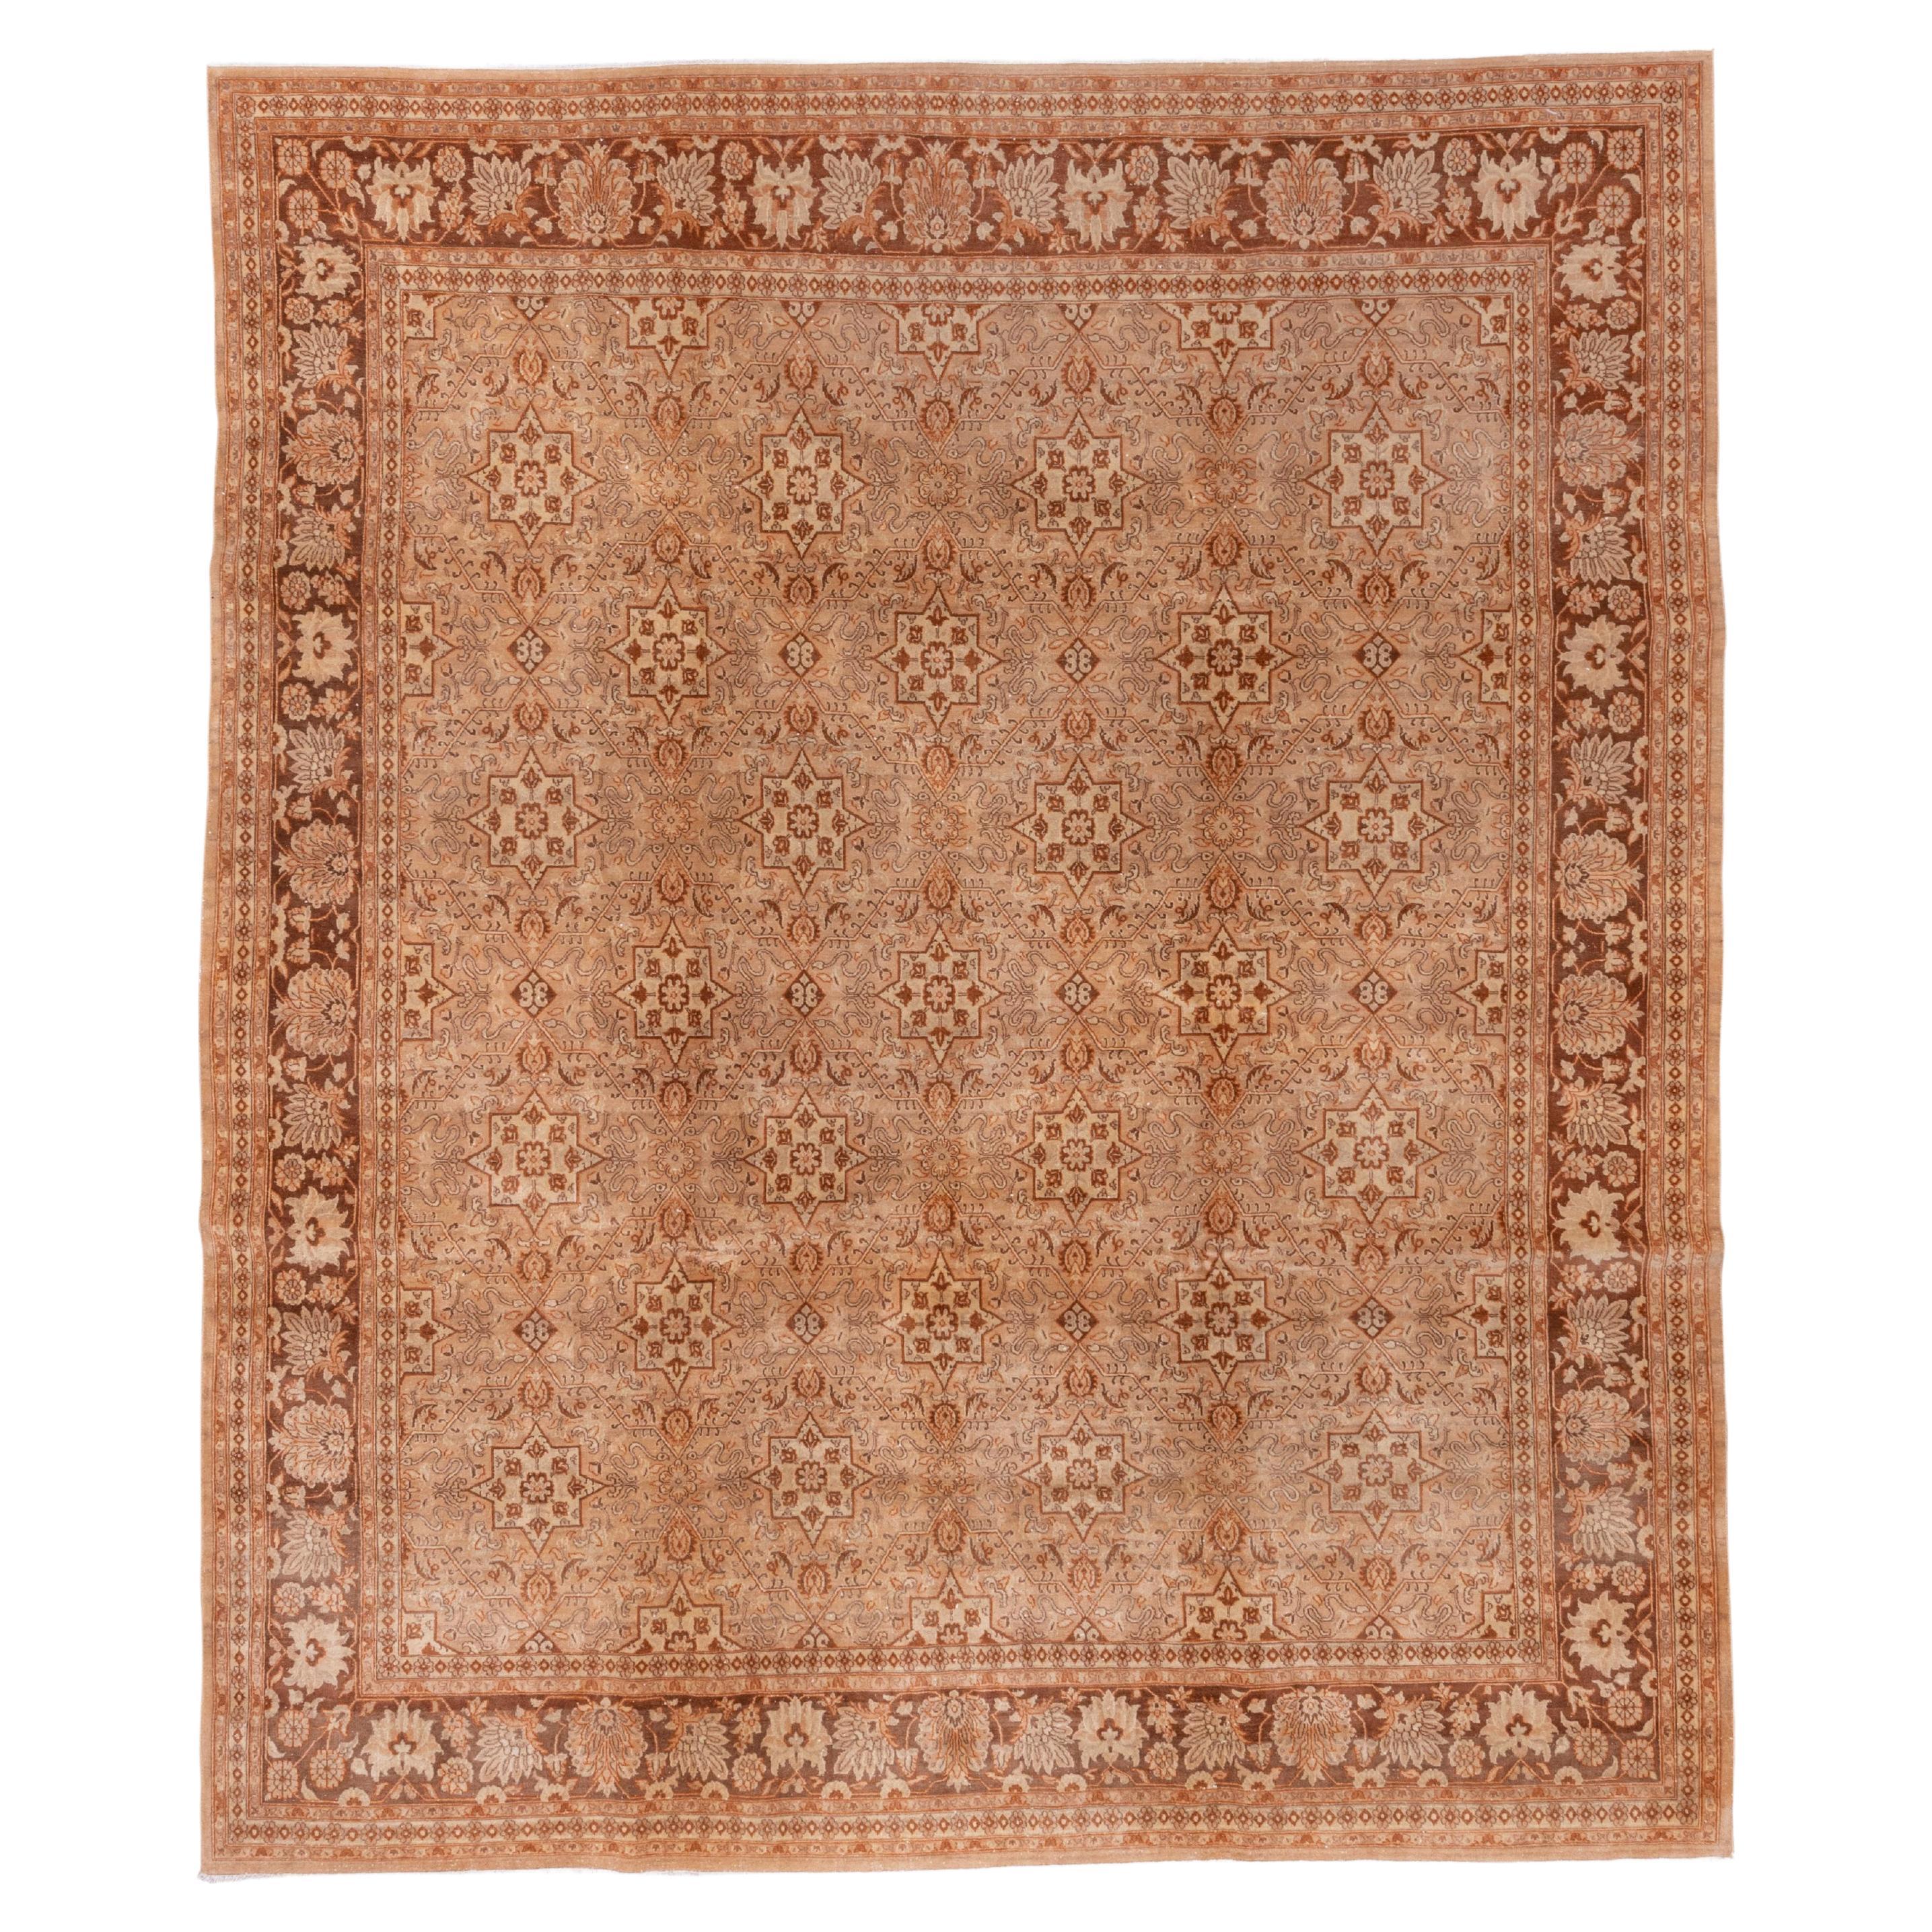 Tapis traditionnel oriental Agra rouille